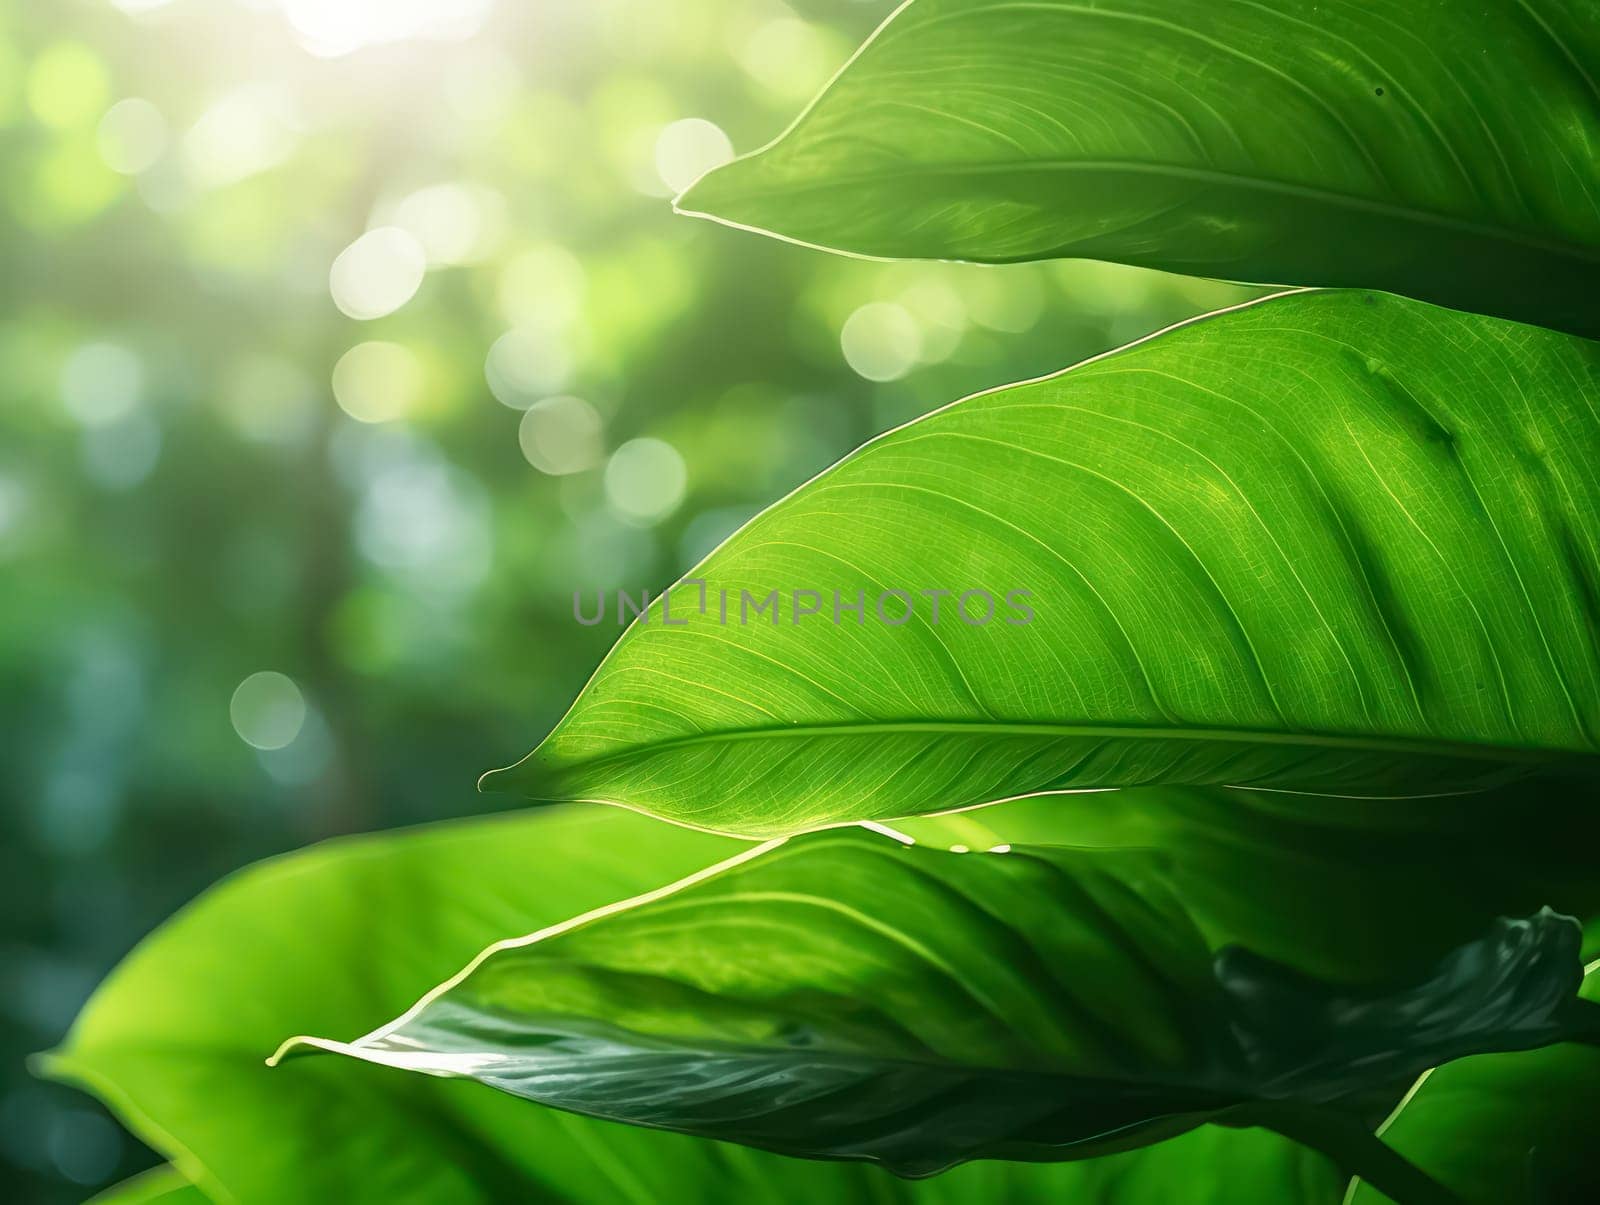 The vibrant green leaves in the summer garden create a natural backdrop, ideal for spring themed backgrounds, cover pages, and ecological or greenery wallpaper designs.